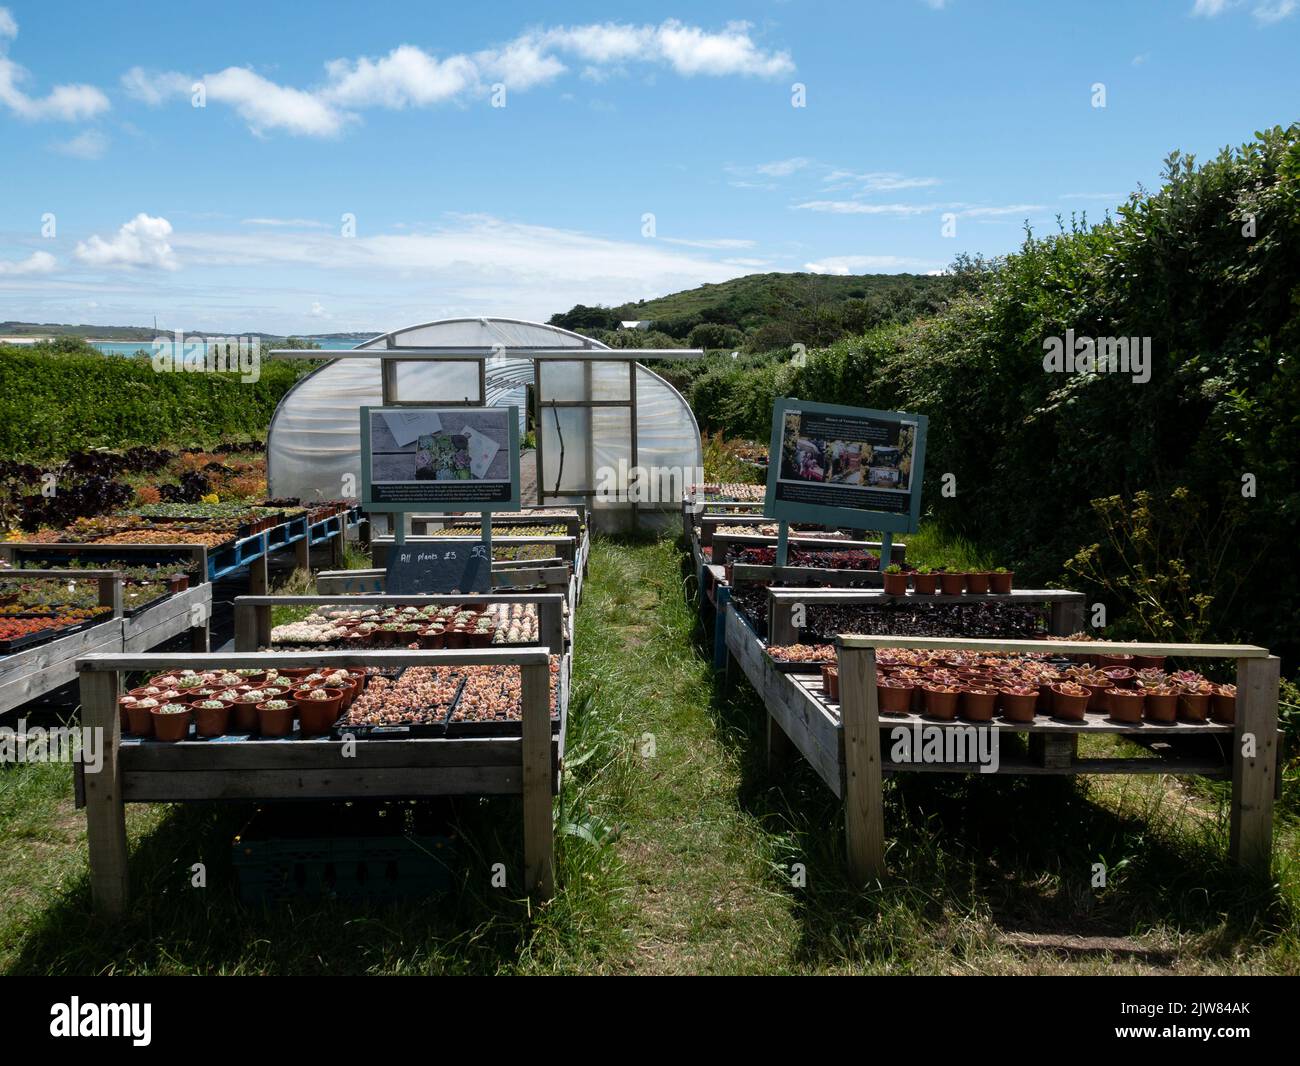 Veronica Farm, Bryher, Isles of Scilly, Cornwall, England, UK. Stock Photo